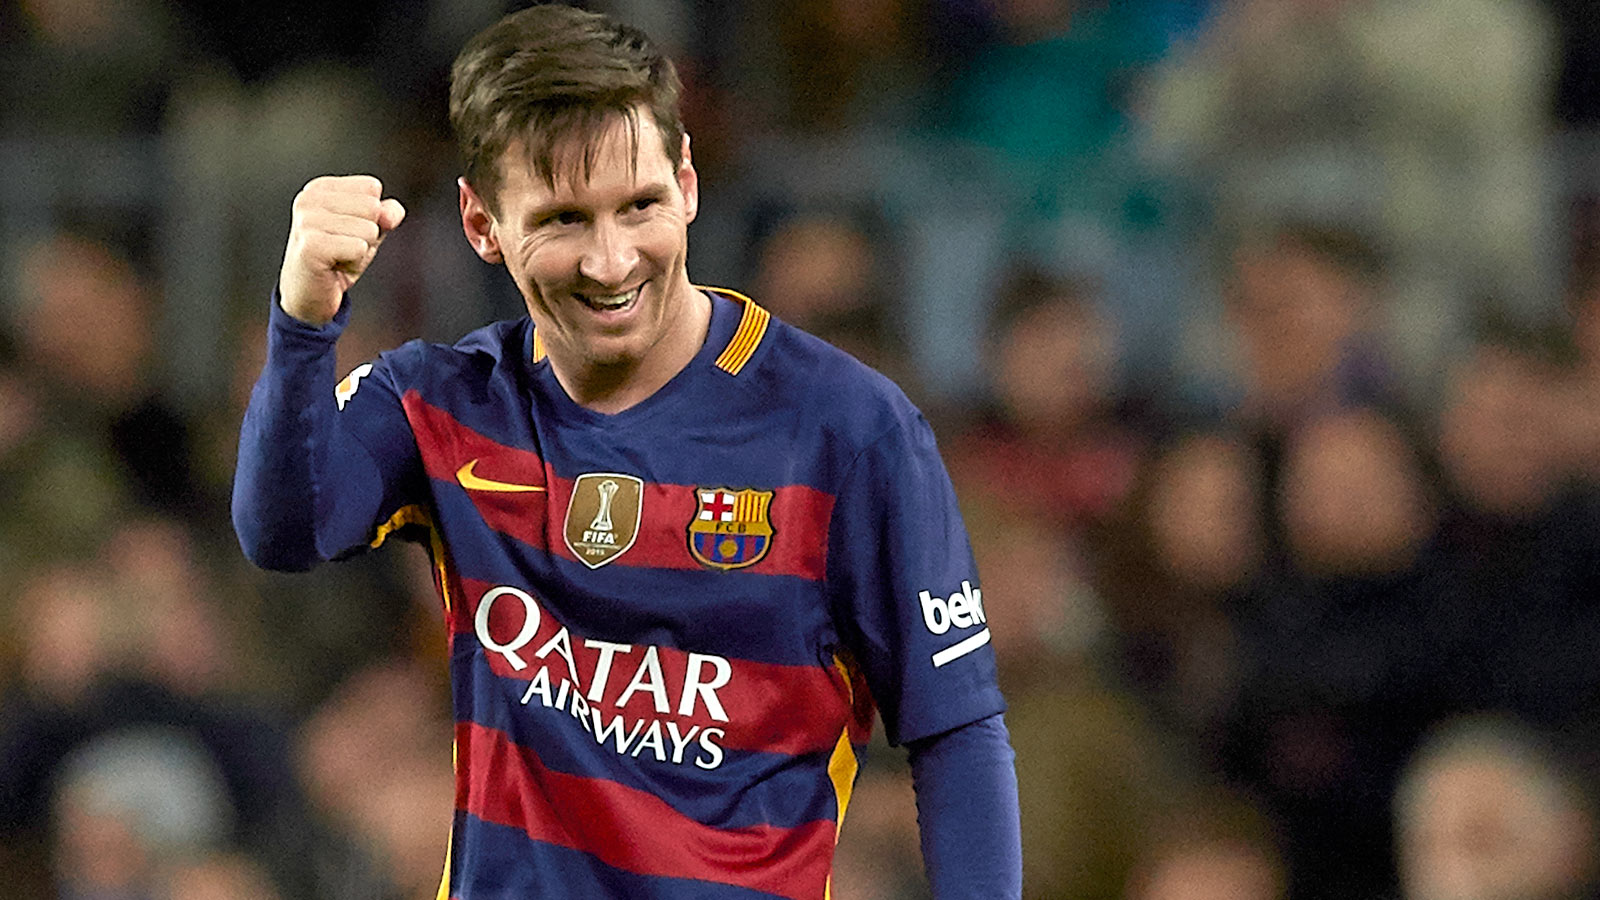 Lionel Messi makes an impossible trick shot goal look ridiculously easy